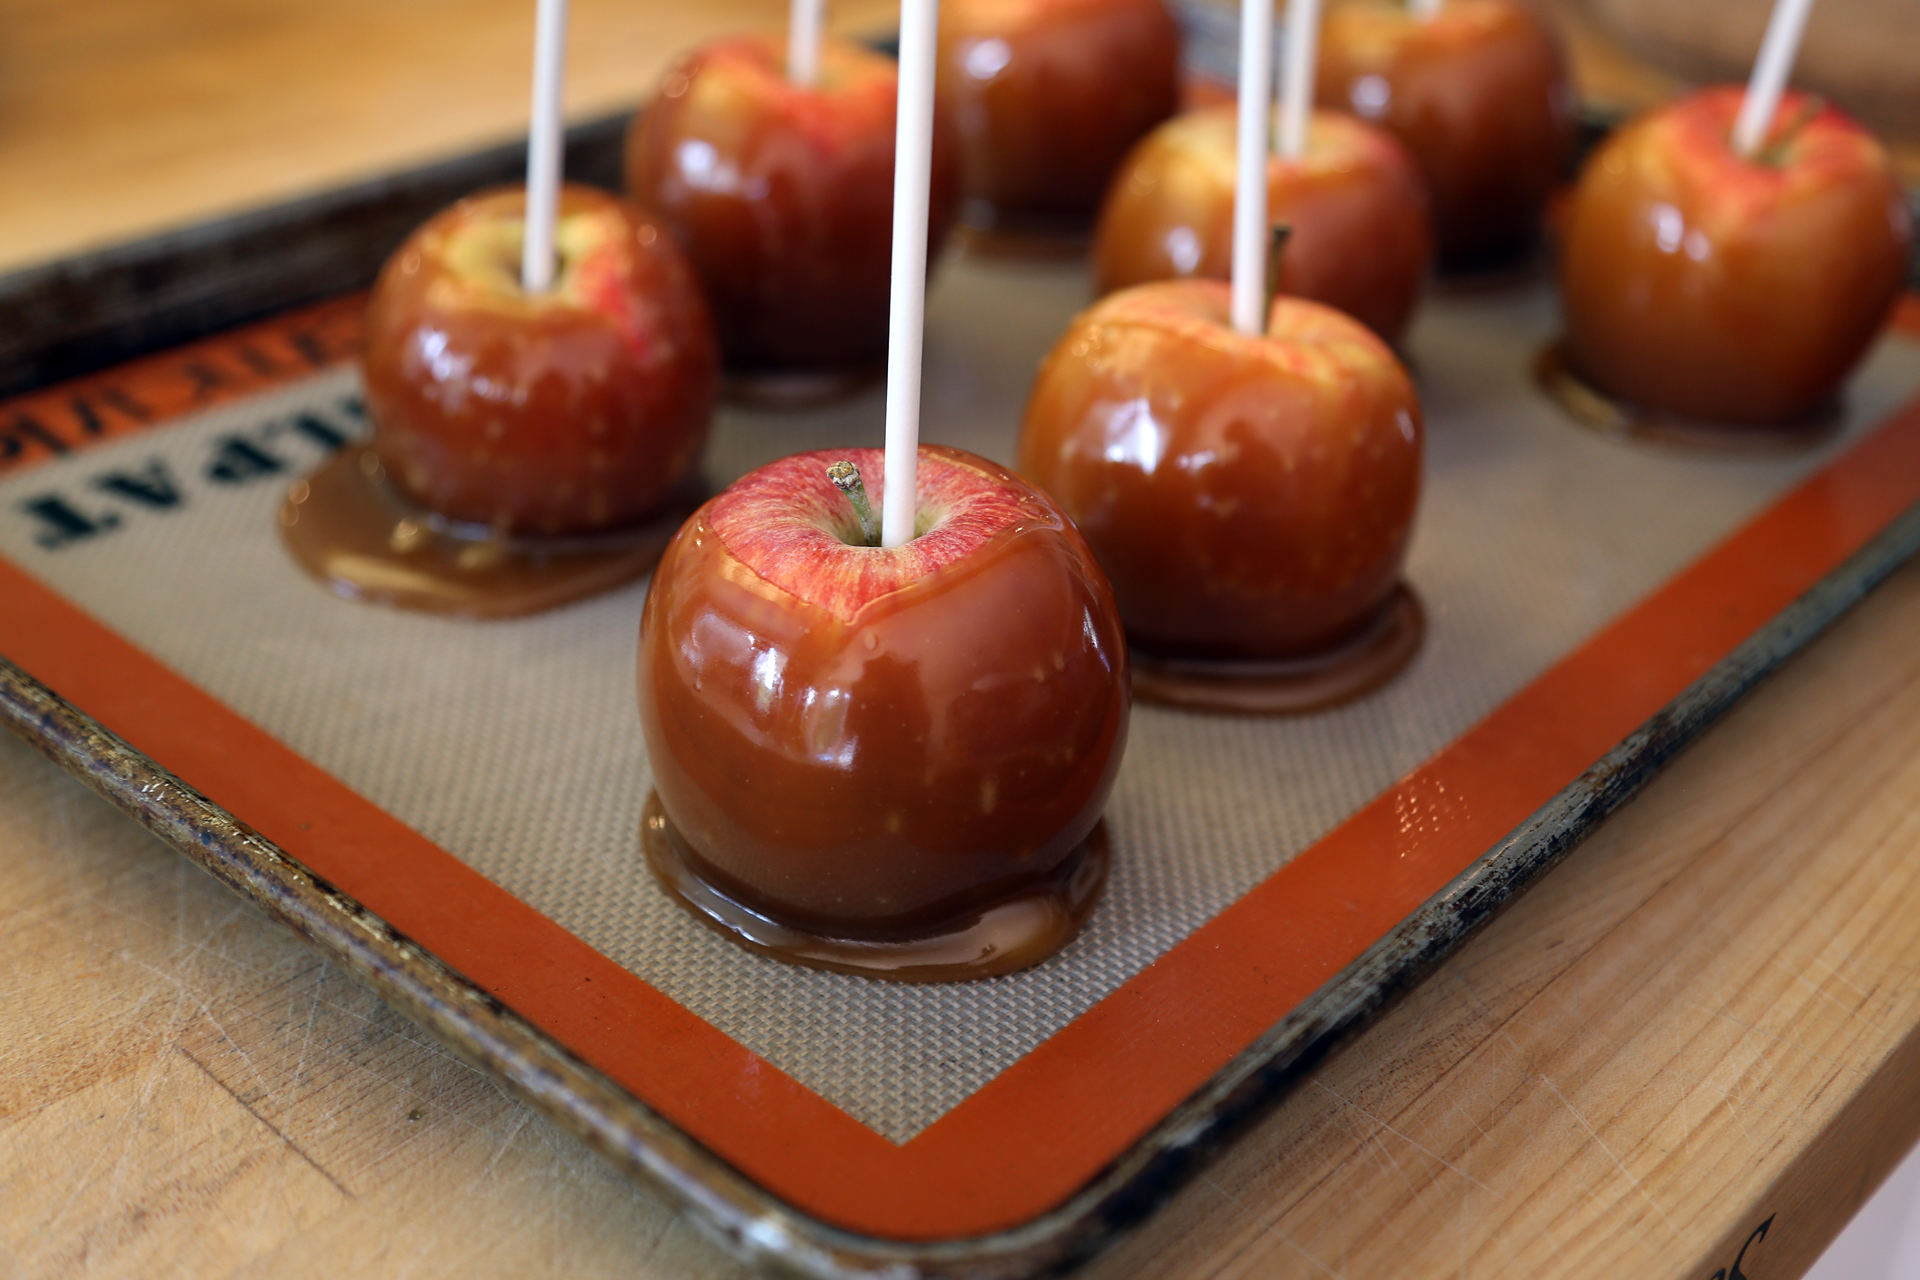 If you are not serving the apples right away, make sure to cover and refrigerate them for up to 1 day before serving.